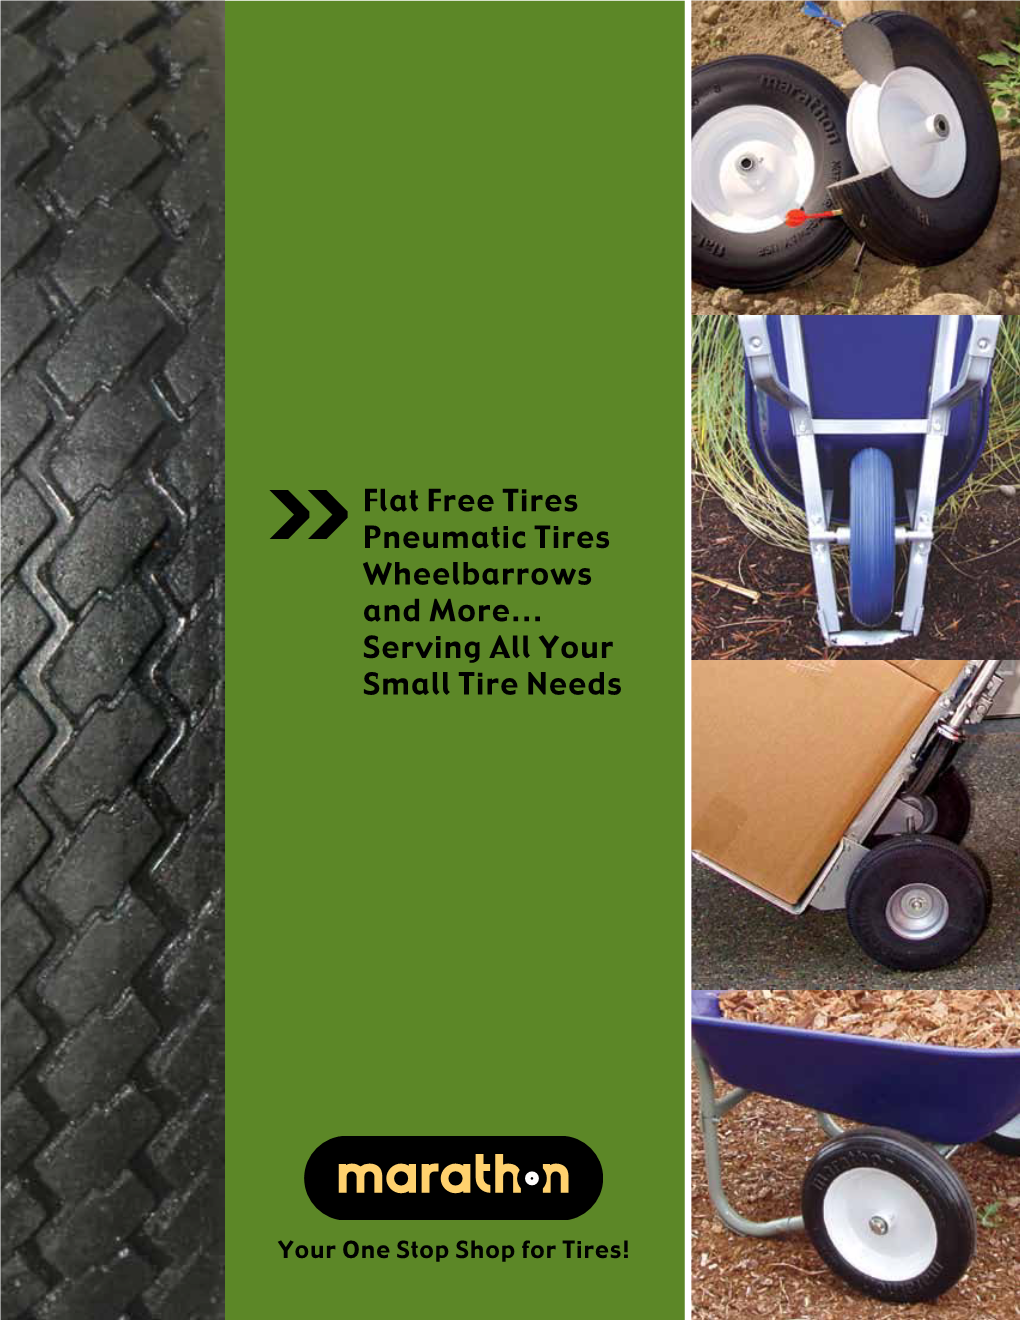 Flat Free Tires Pneumatic Tires Wheelbarrows and More... Serving All Your Small Tire Needs